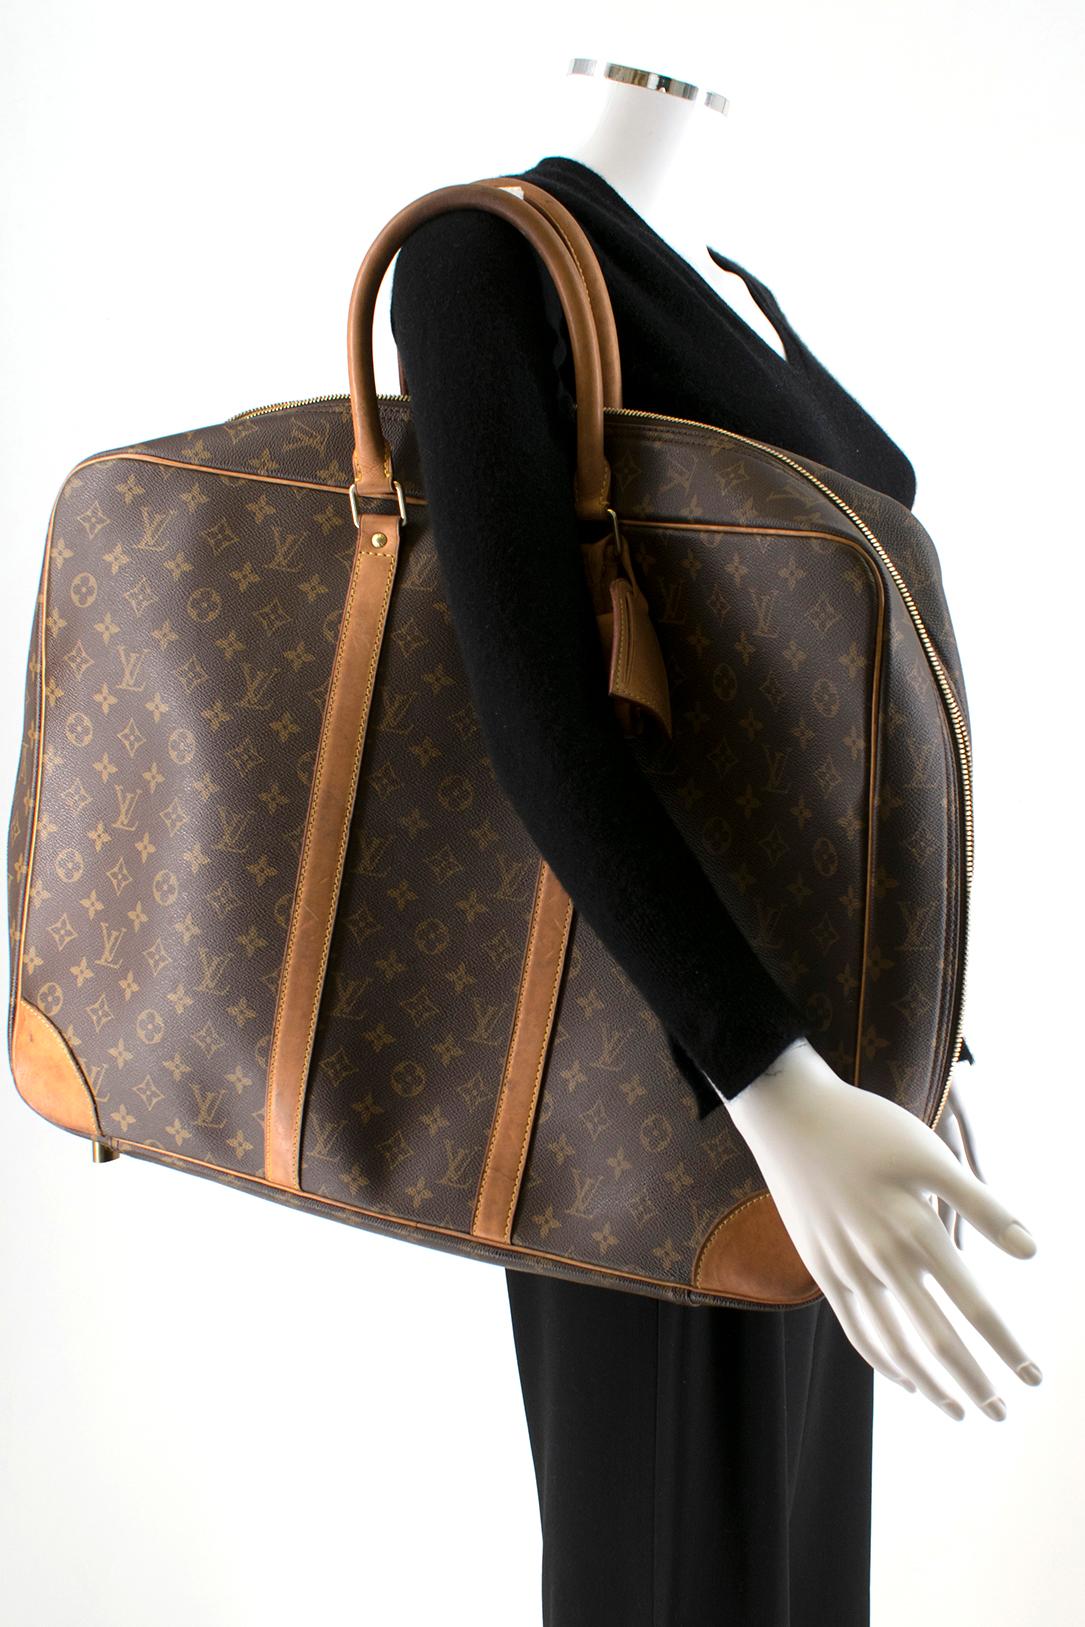 Louis Vuitton Sirius 55 Soft sided Luggage One size 5